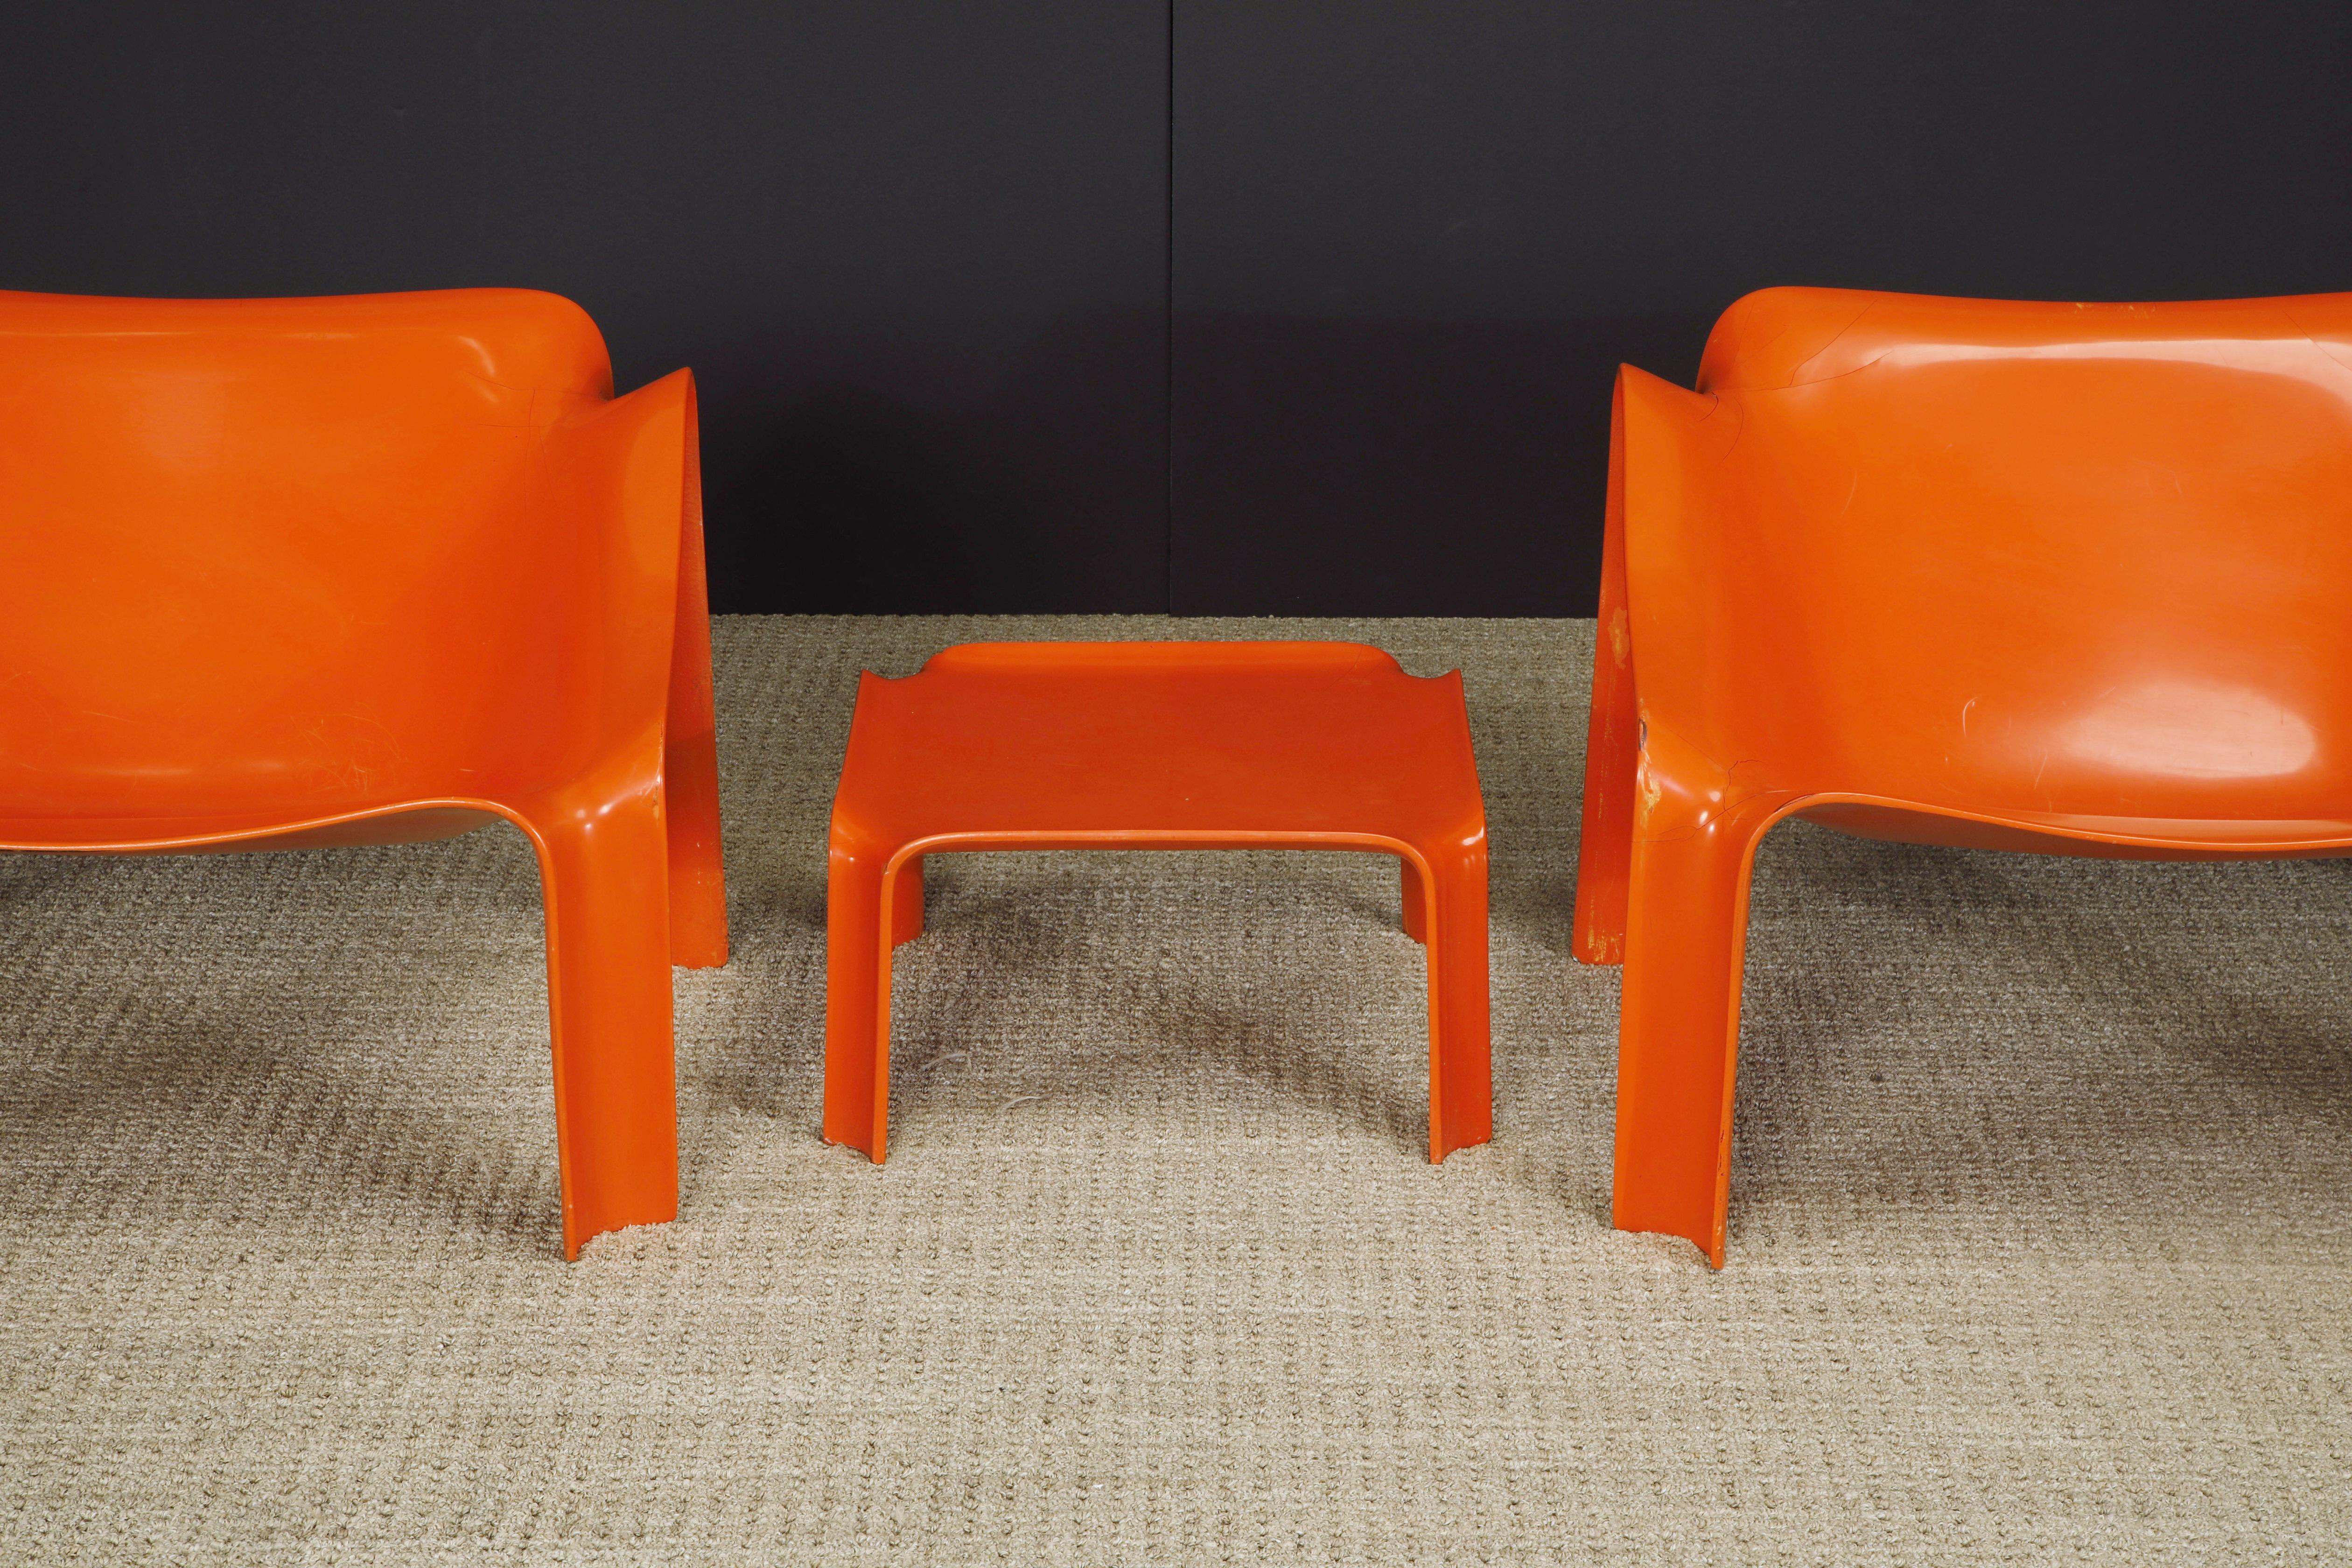 Dutch Model 'F303' Lounge Chairs & Side Table by Pierre Paulin for Artifort, c 1970s